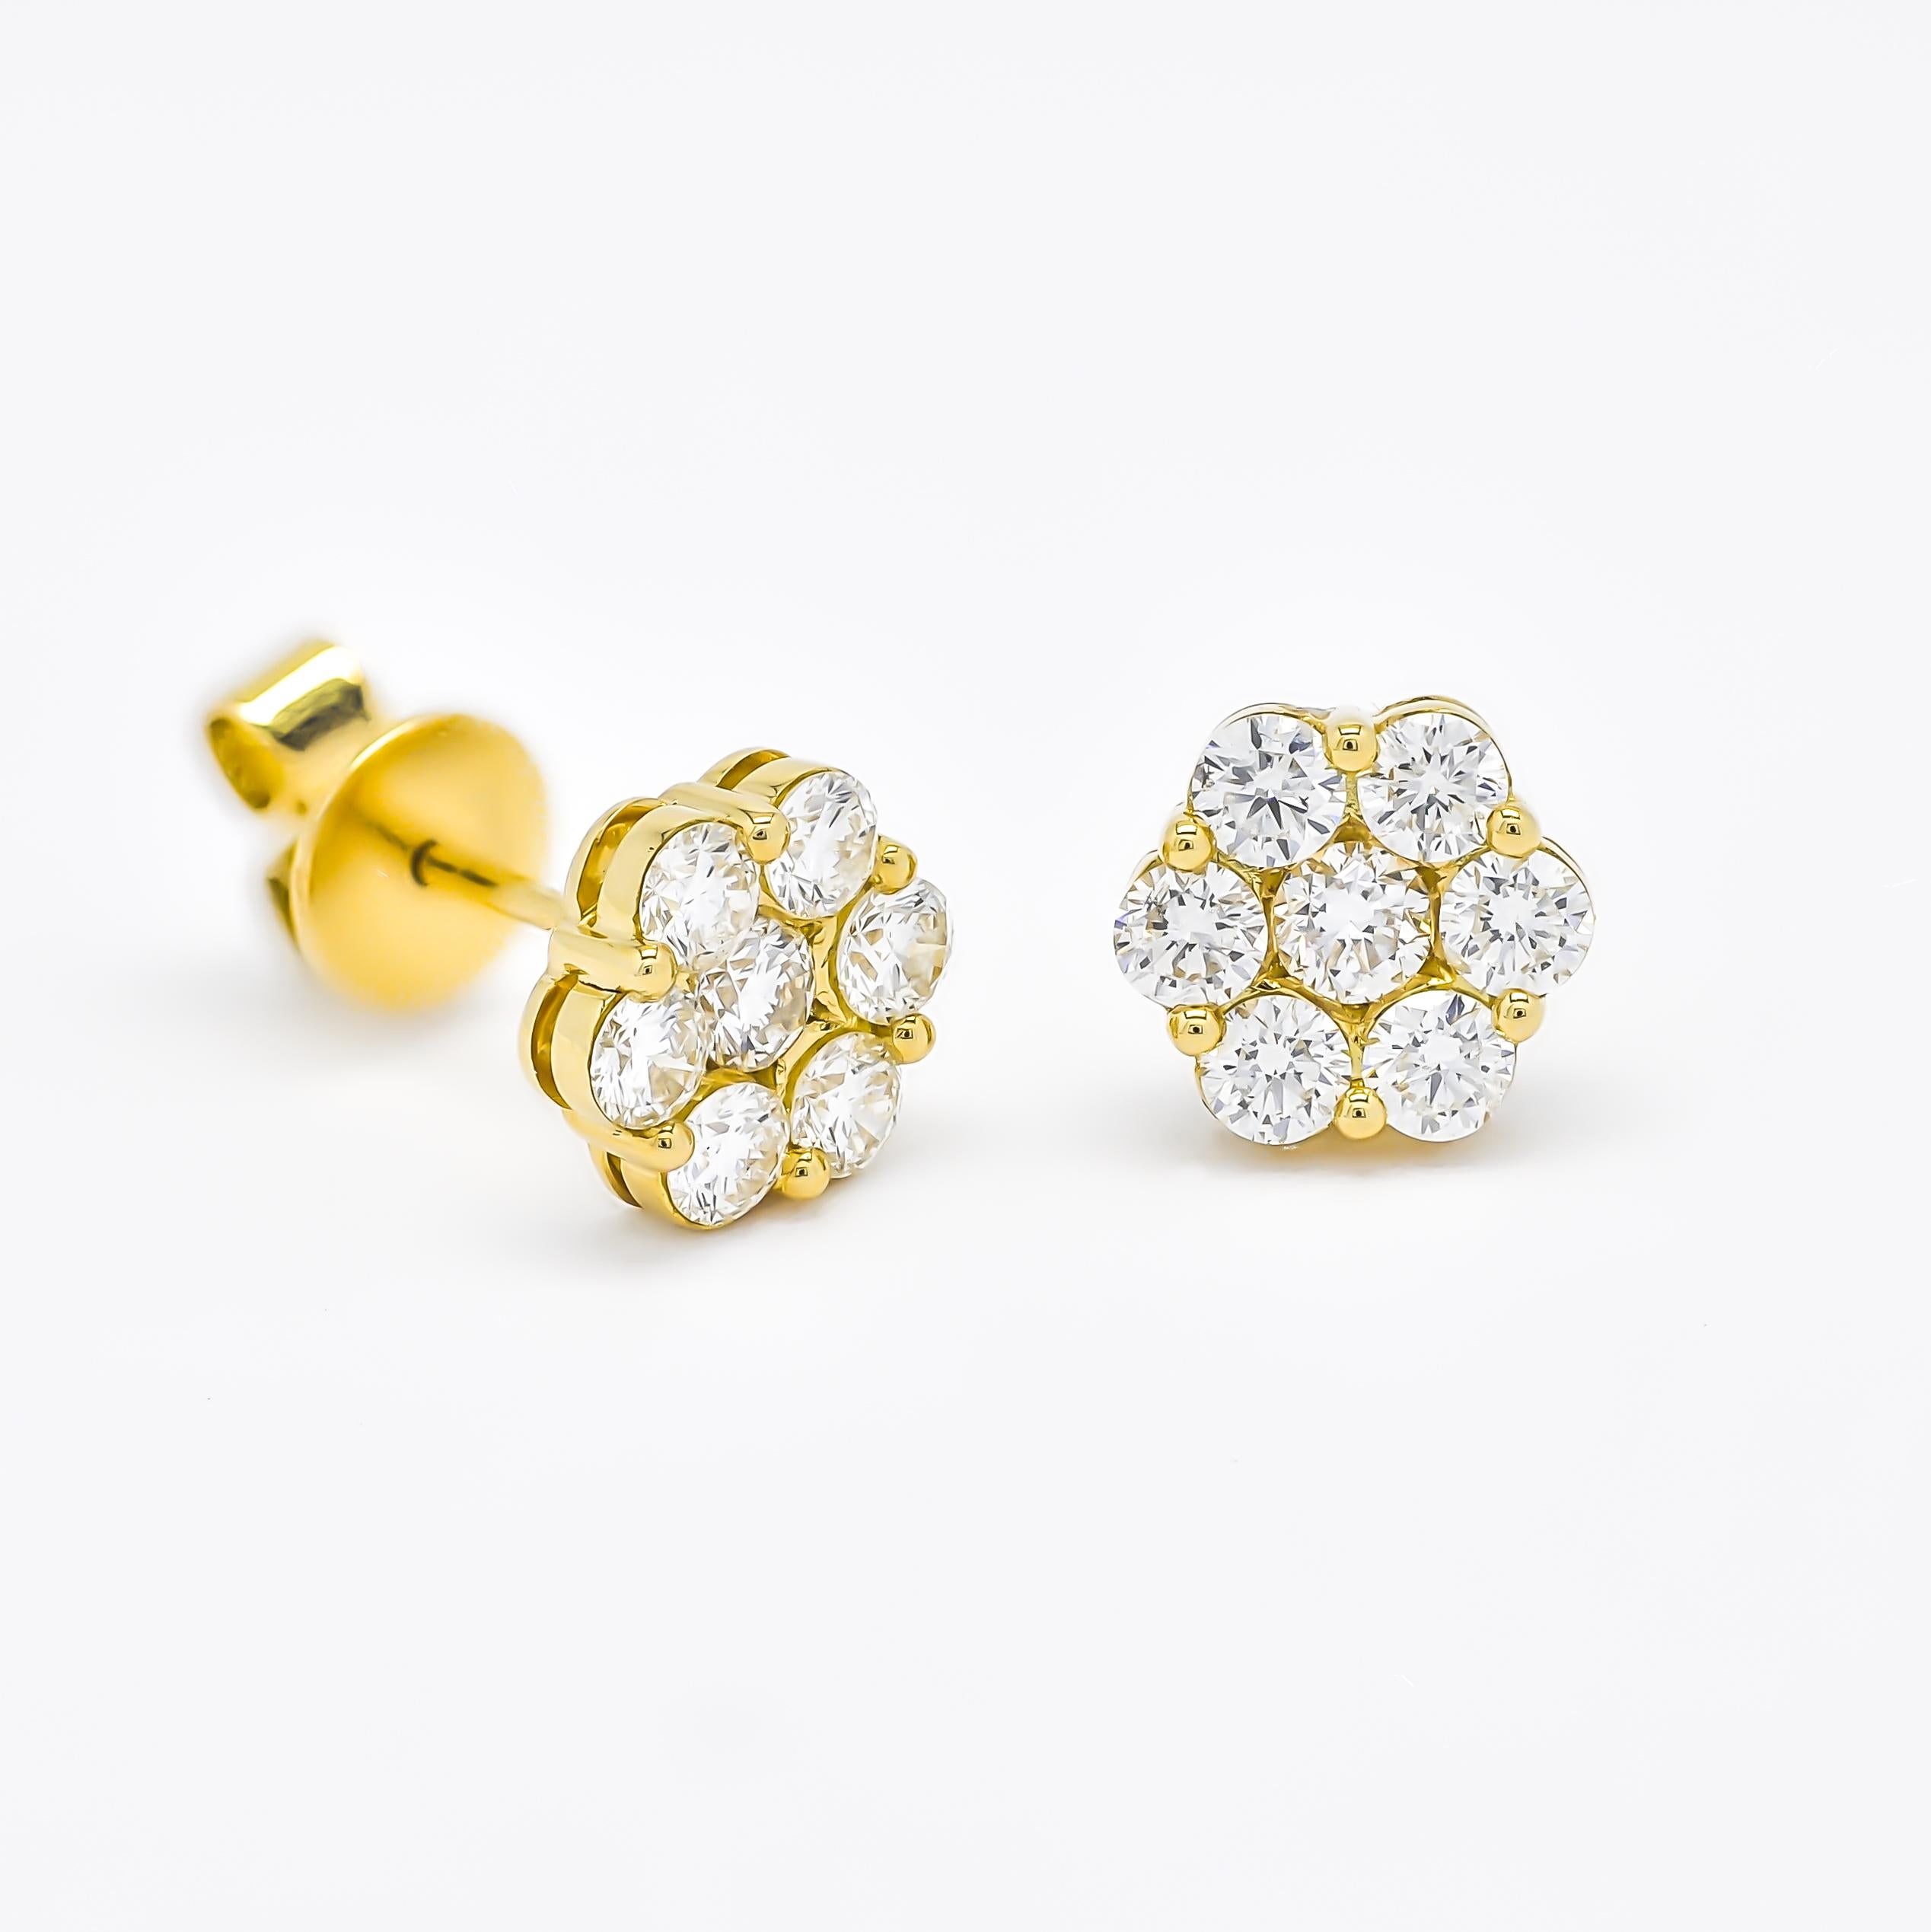 Round Cut Natural Diamond 1.00 cts in 18 Karat Yellow Gold classic Cluster Earrings For Sale